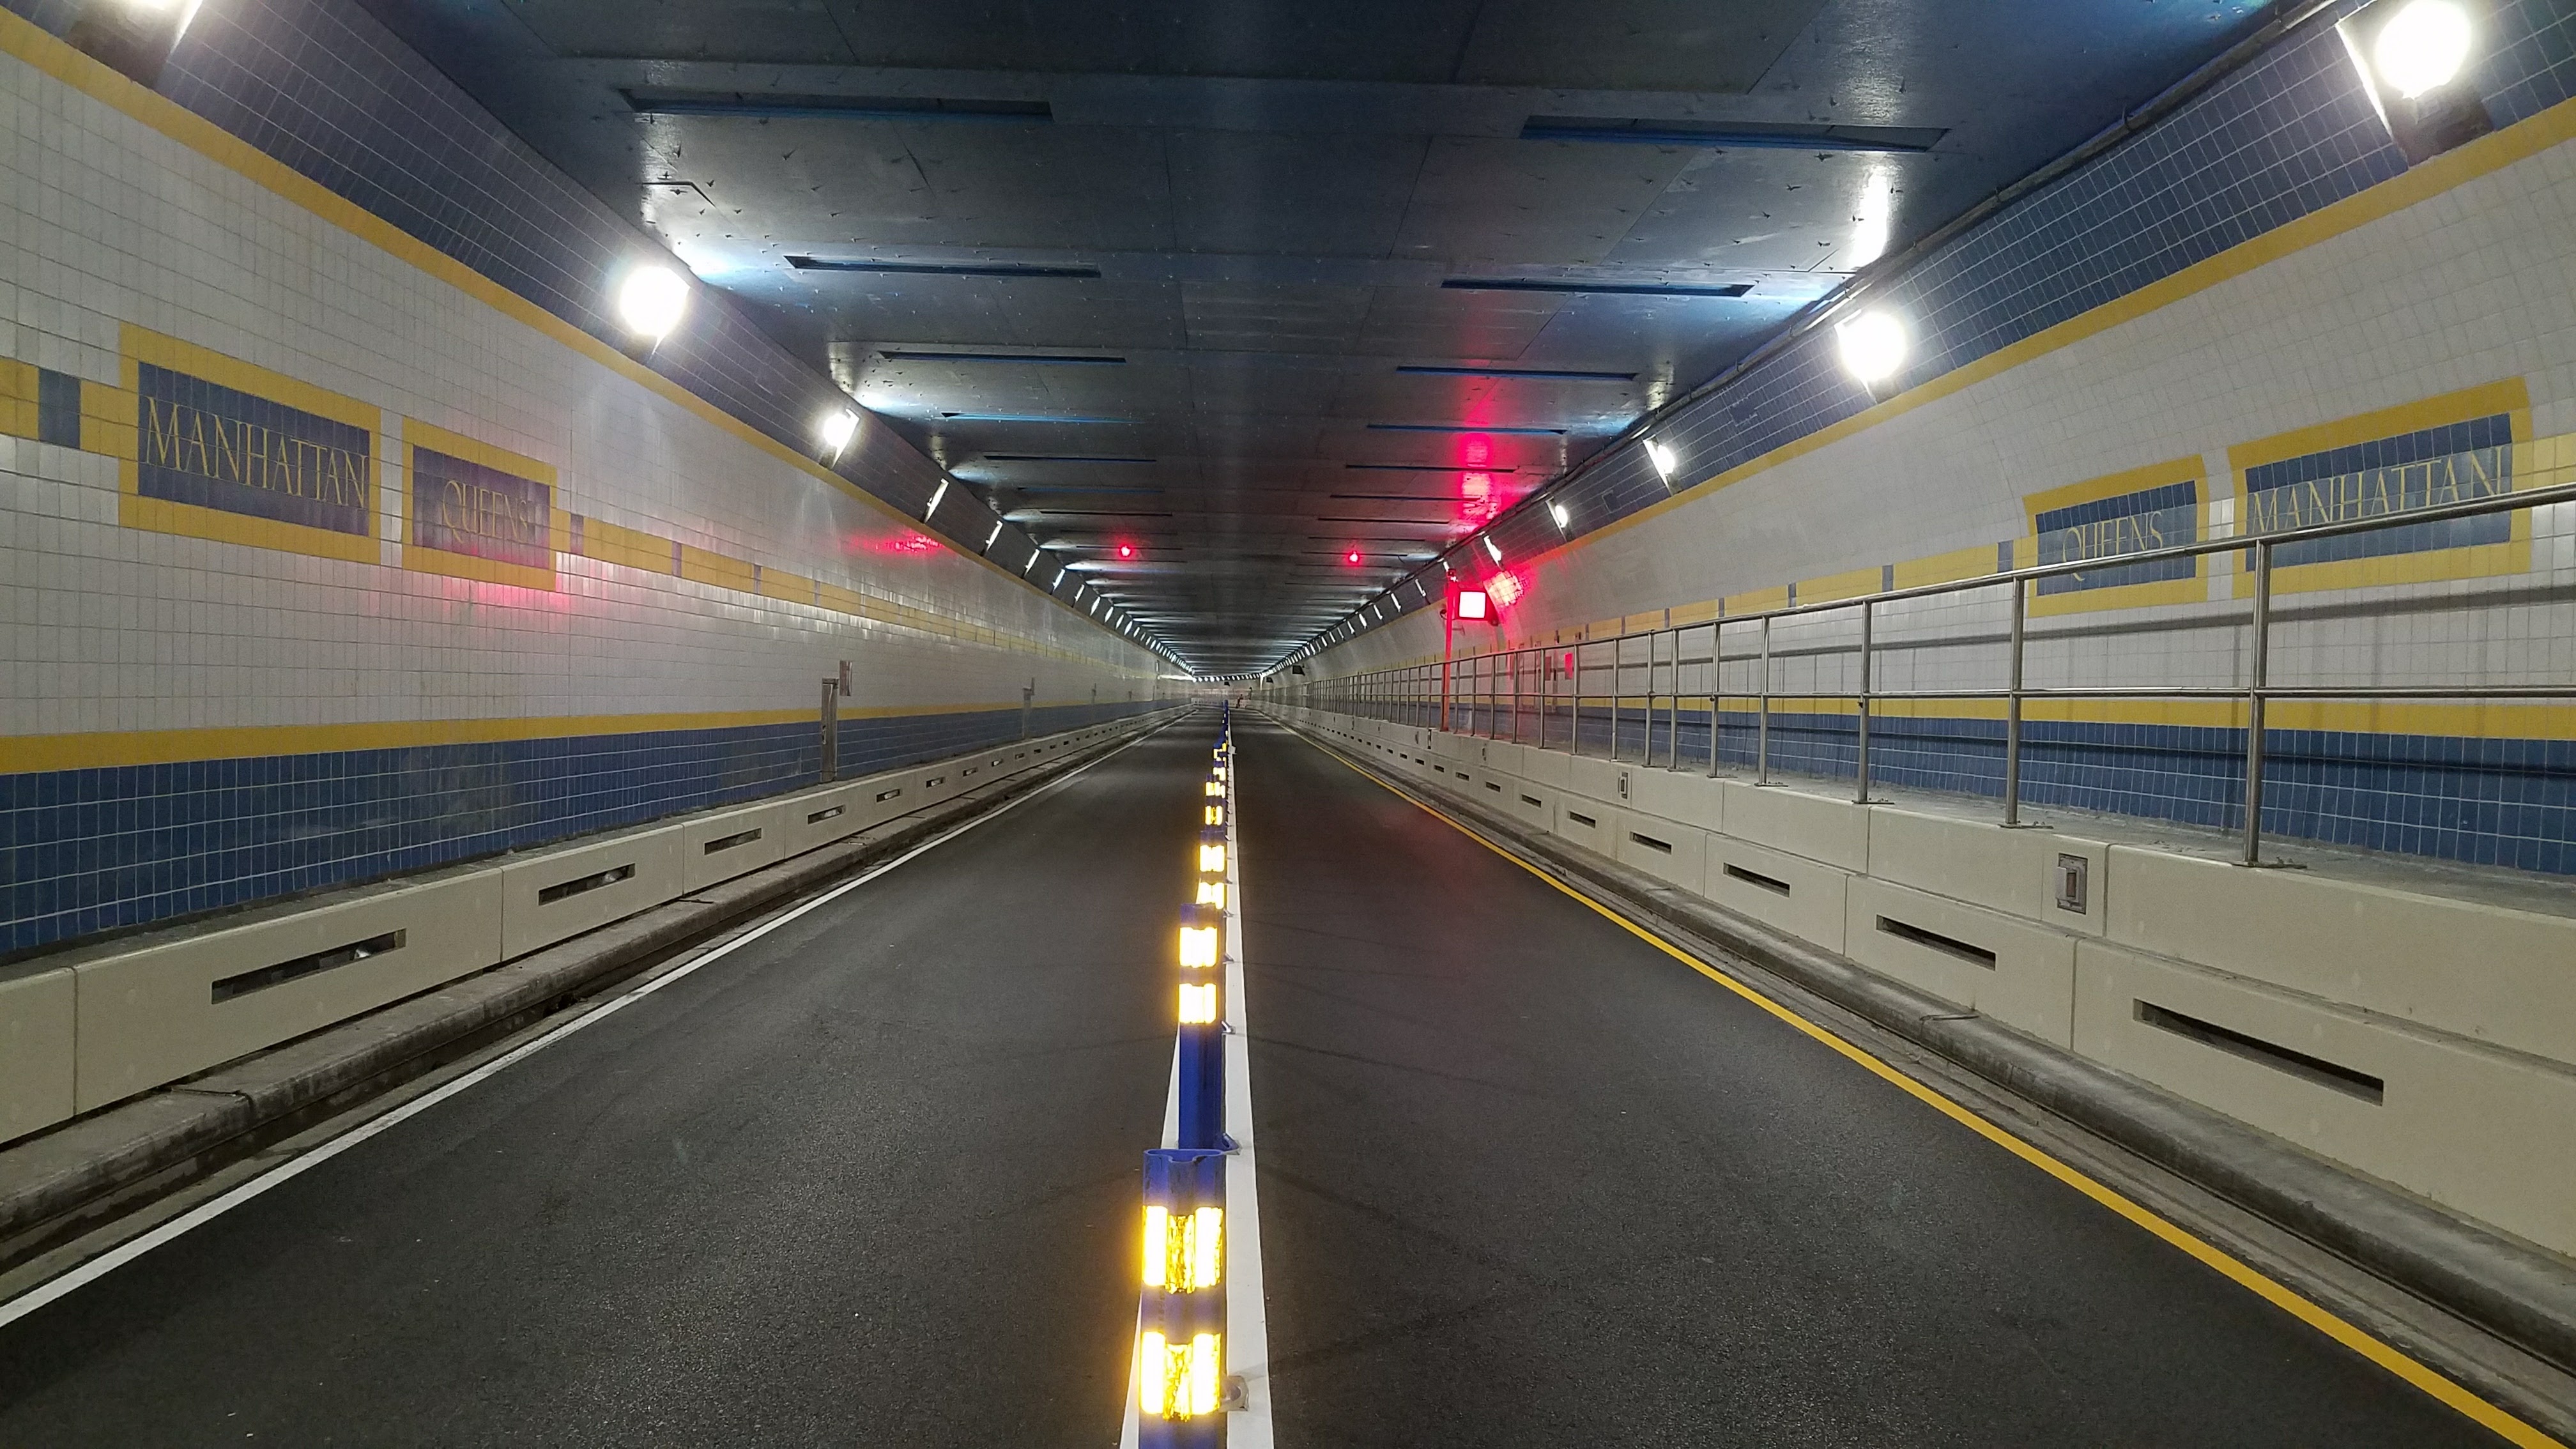 A head-on view of a tunnel designed for vehicular traffic. Blue and yellow subway tiling on the walls says "Manhattan" and "Queens."